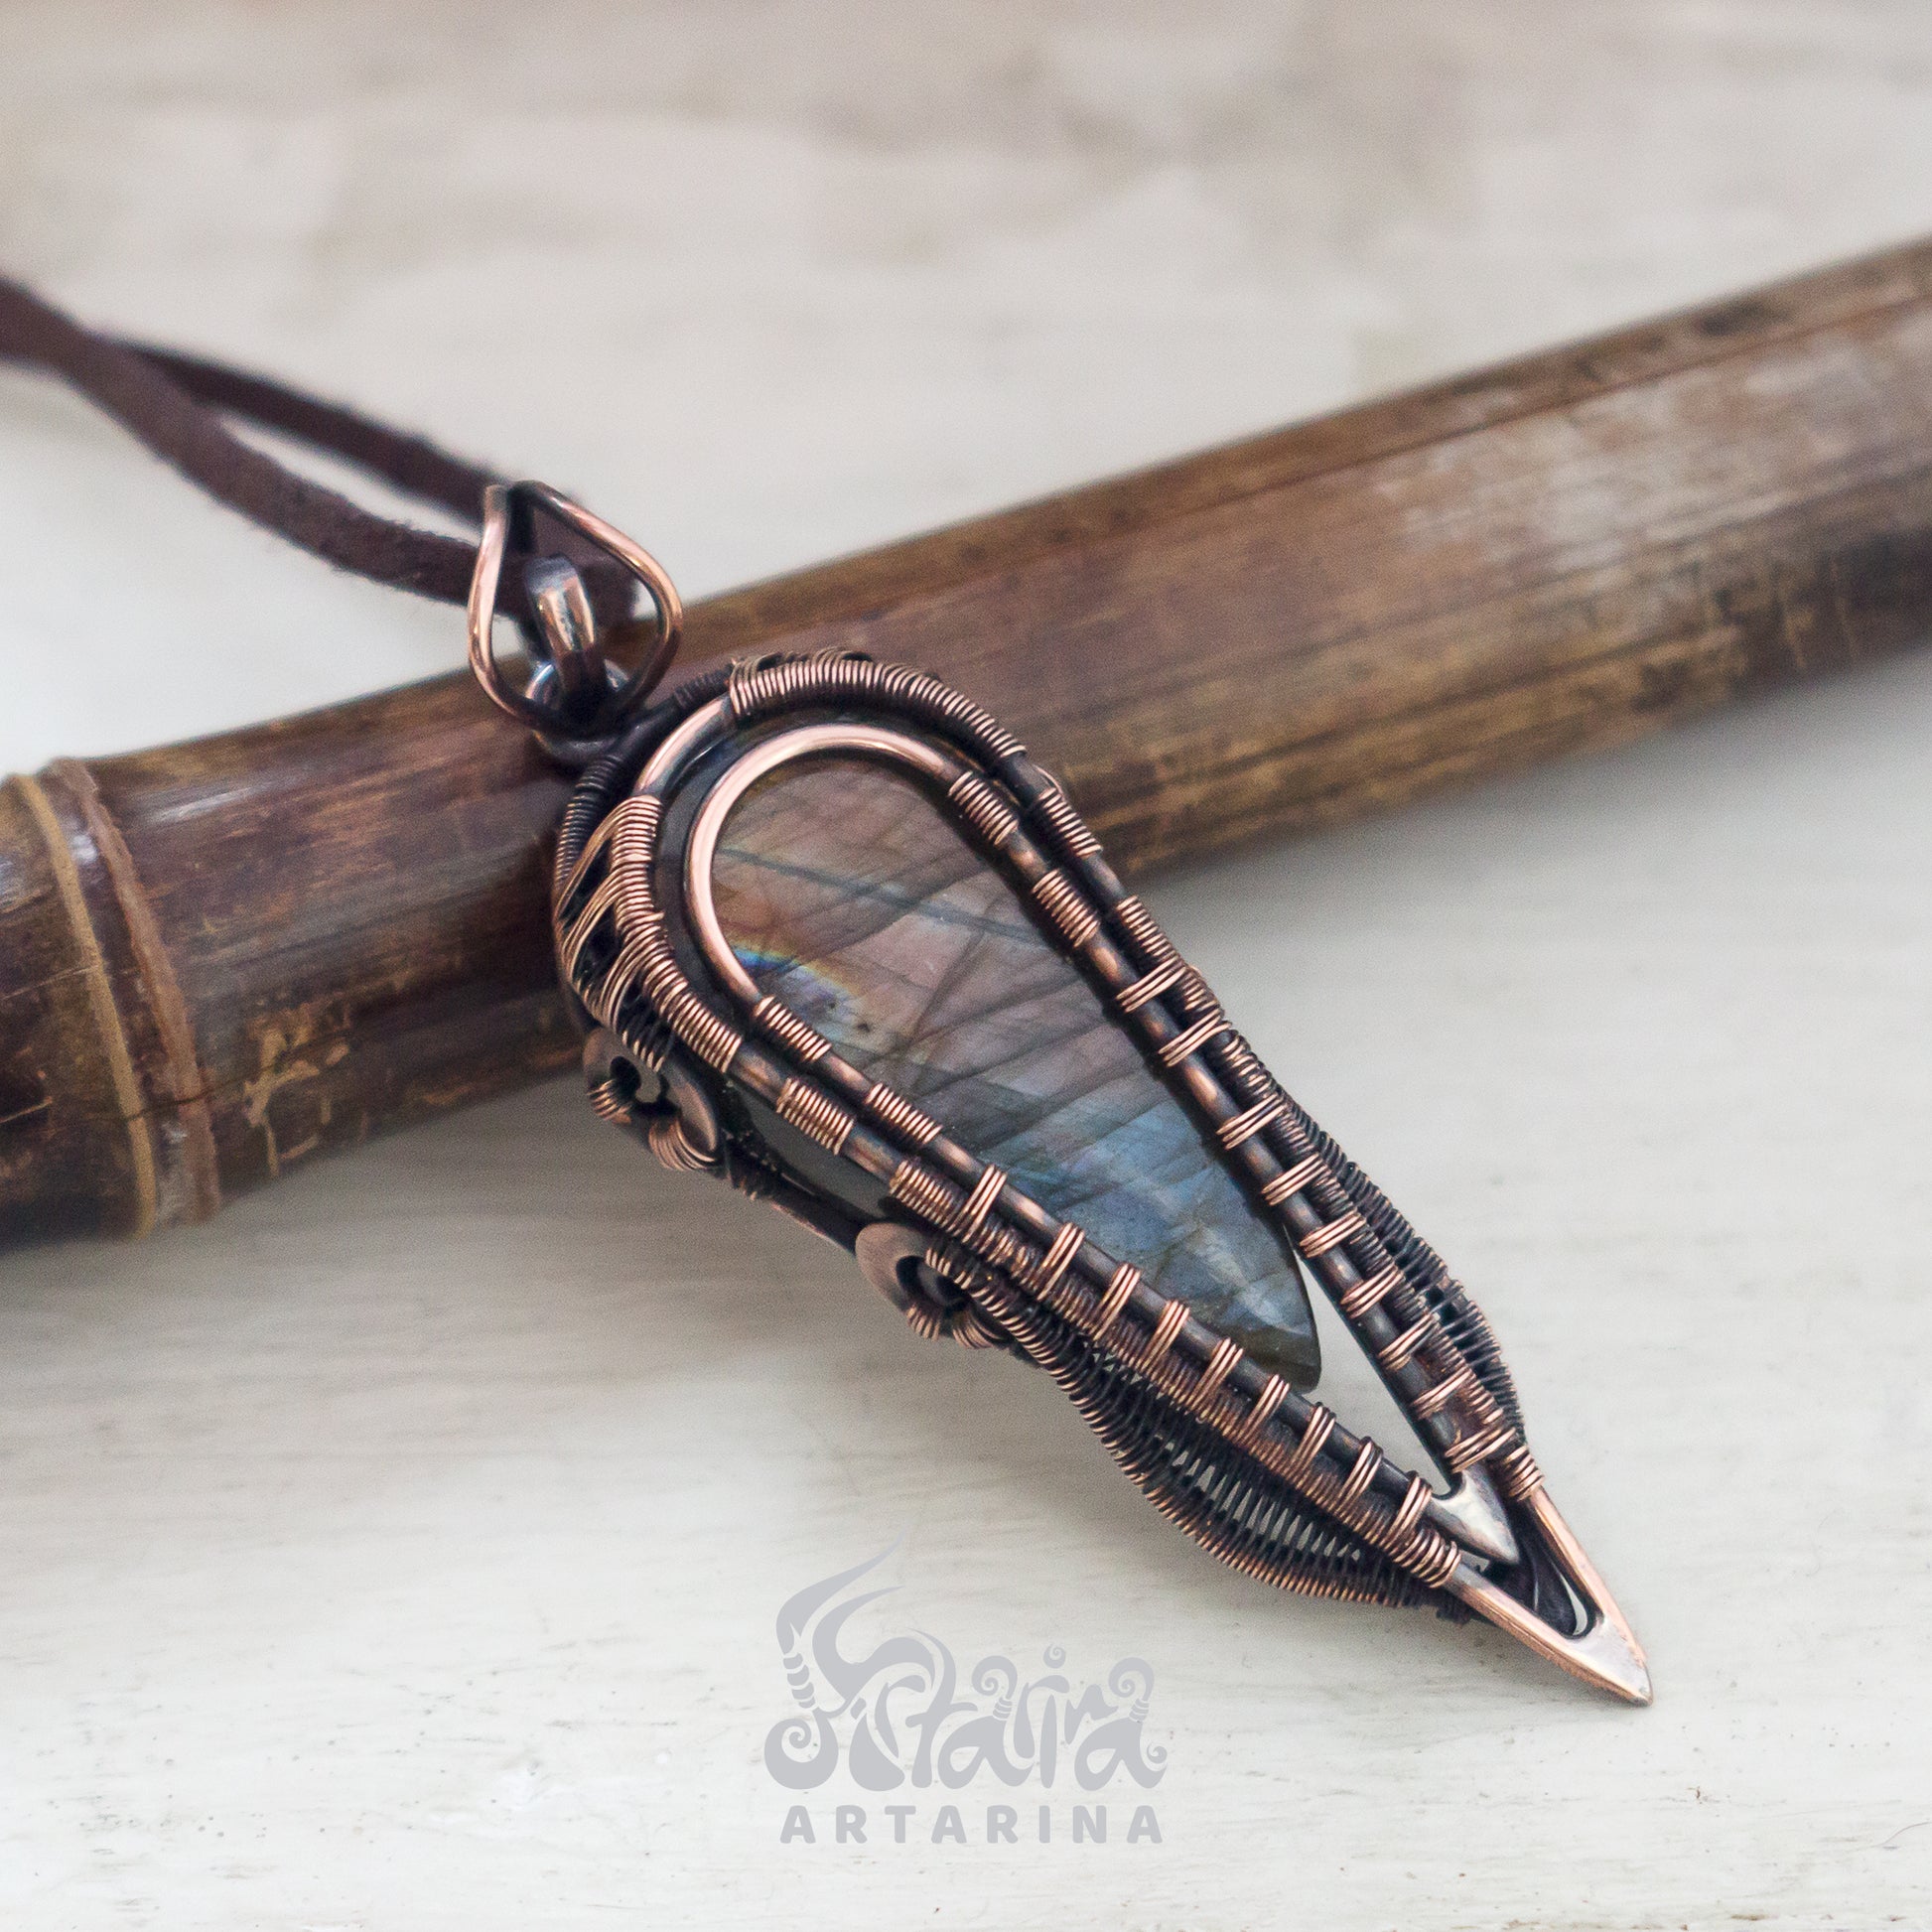 Artisan pendant made from antiqued copper wire, encasing a shiny natural labradorite stone, creating a mystical and one-of-a-kind accessory. pic 1